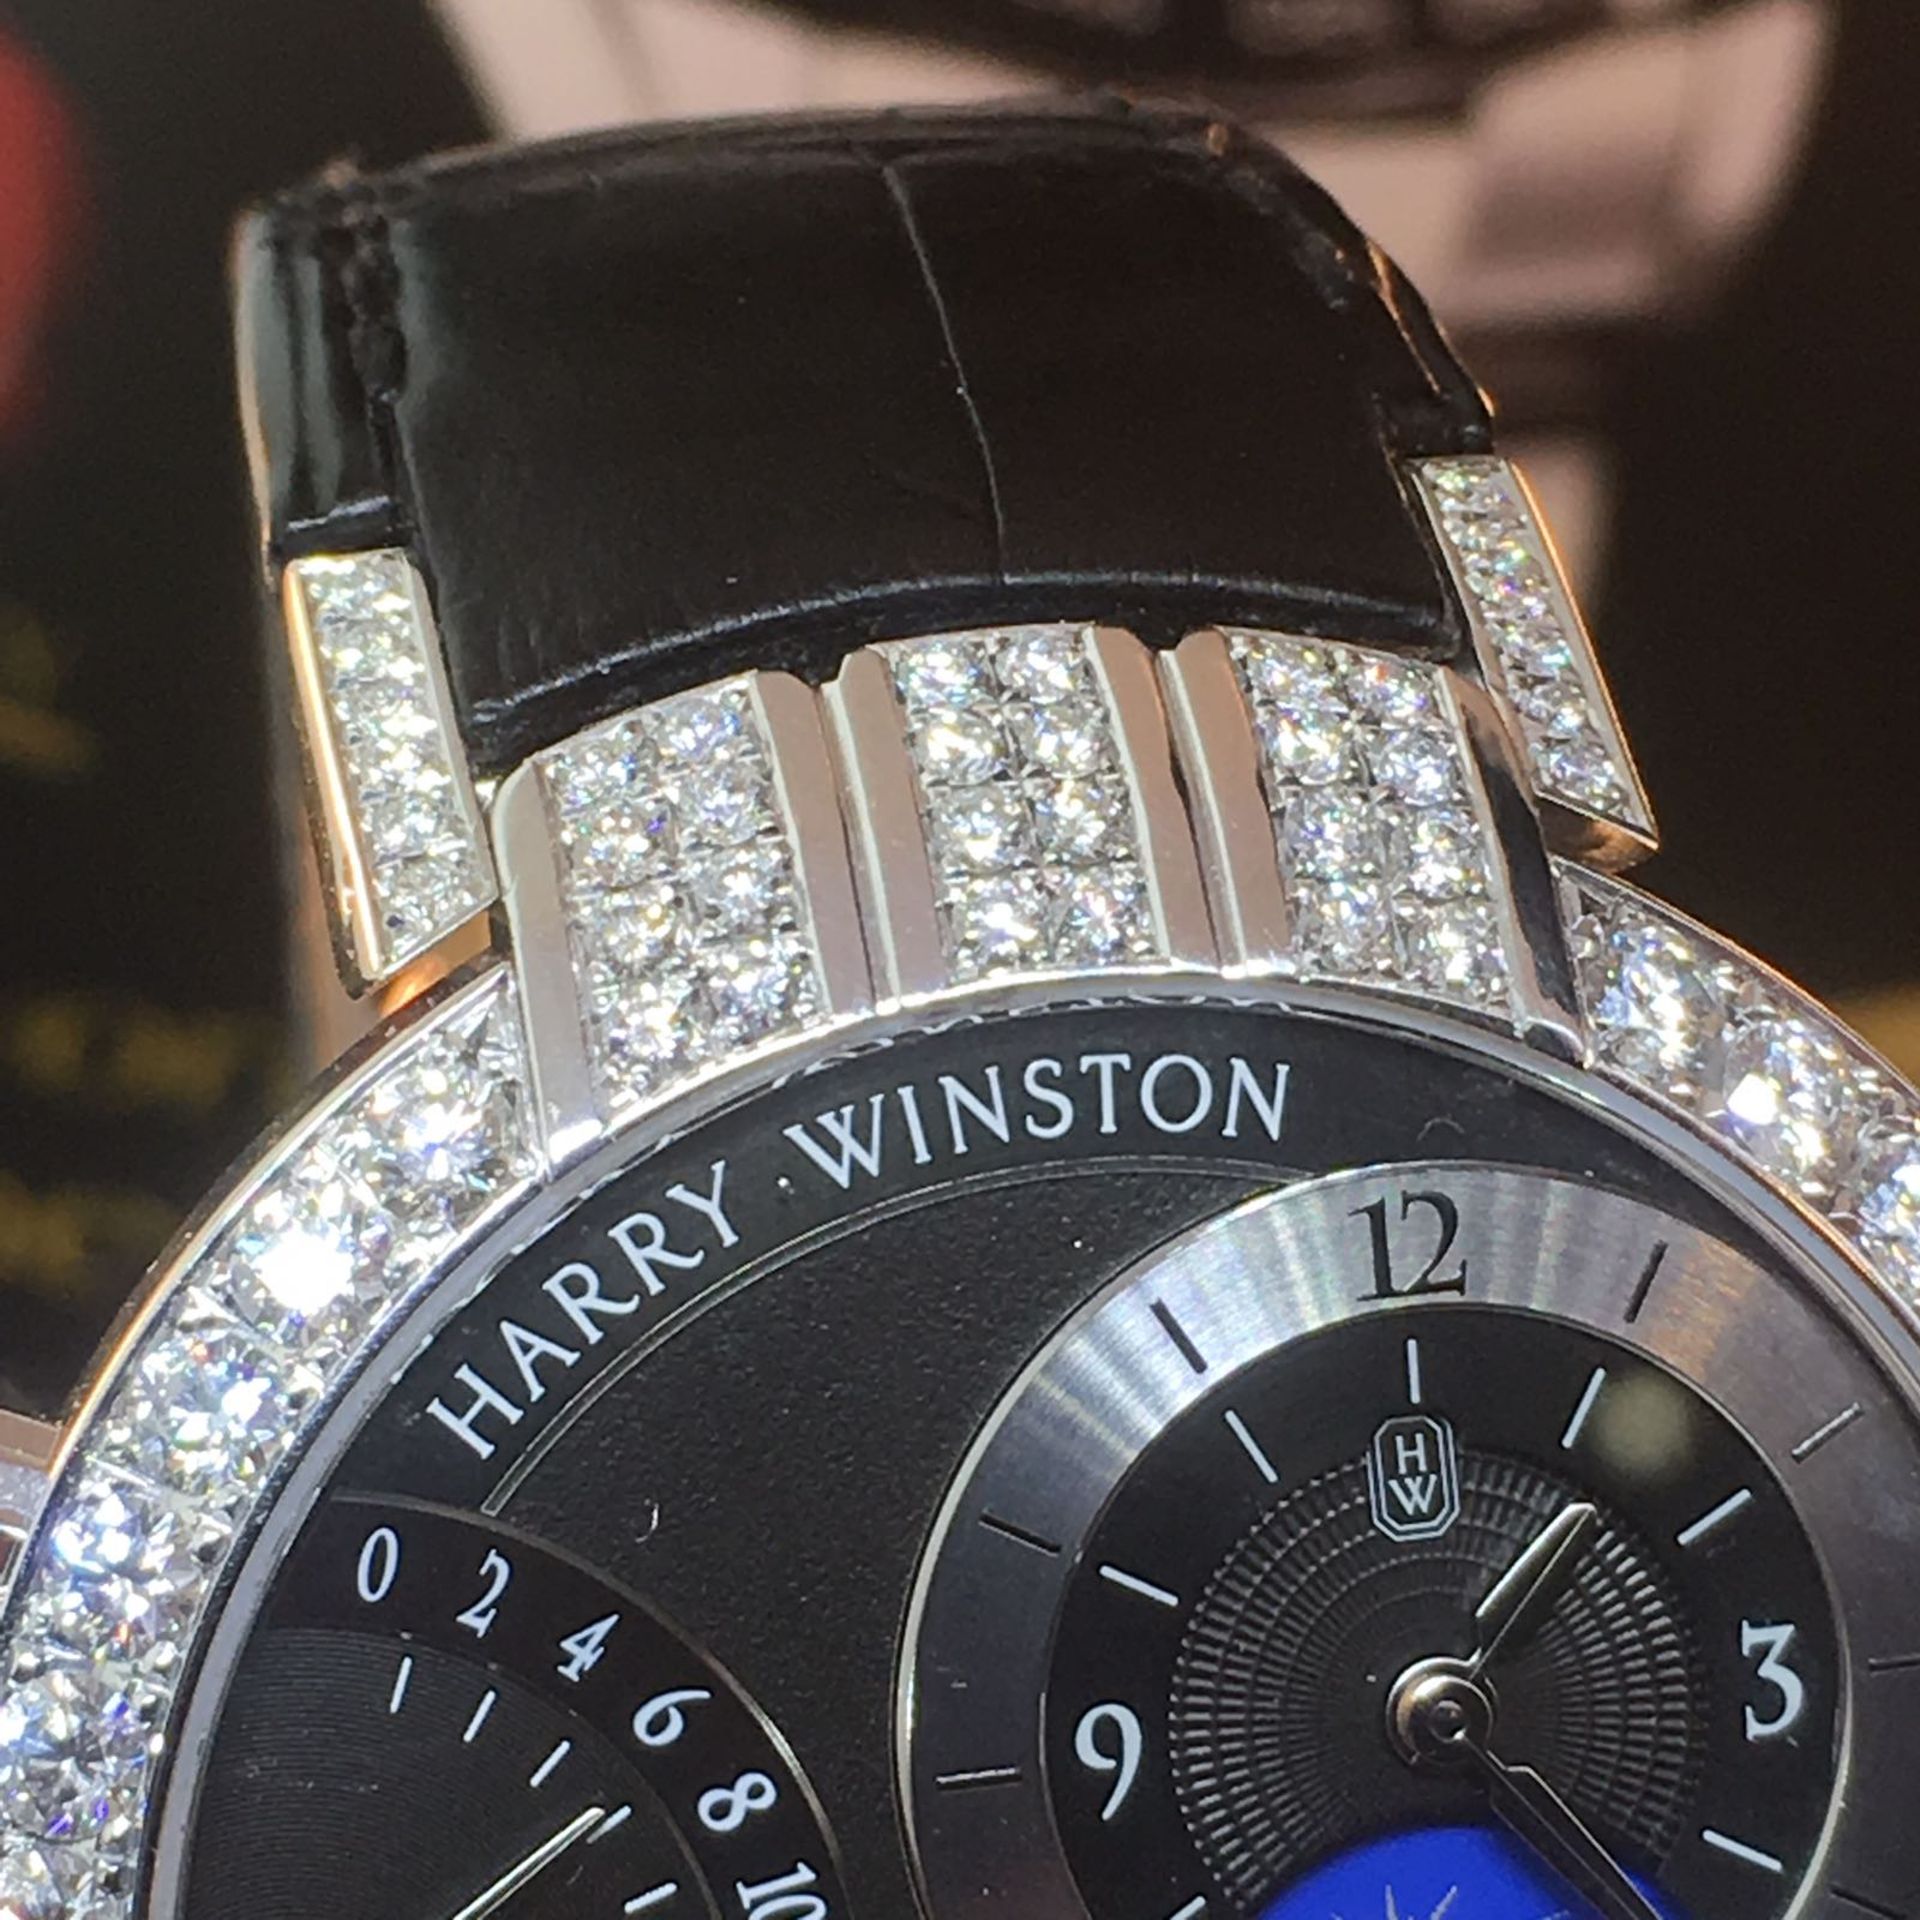 HARRY WINSTON Premier Excenter 18k White Gold Watch with box & papers - Image 5 of 9